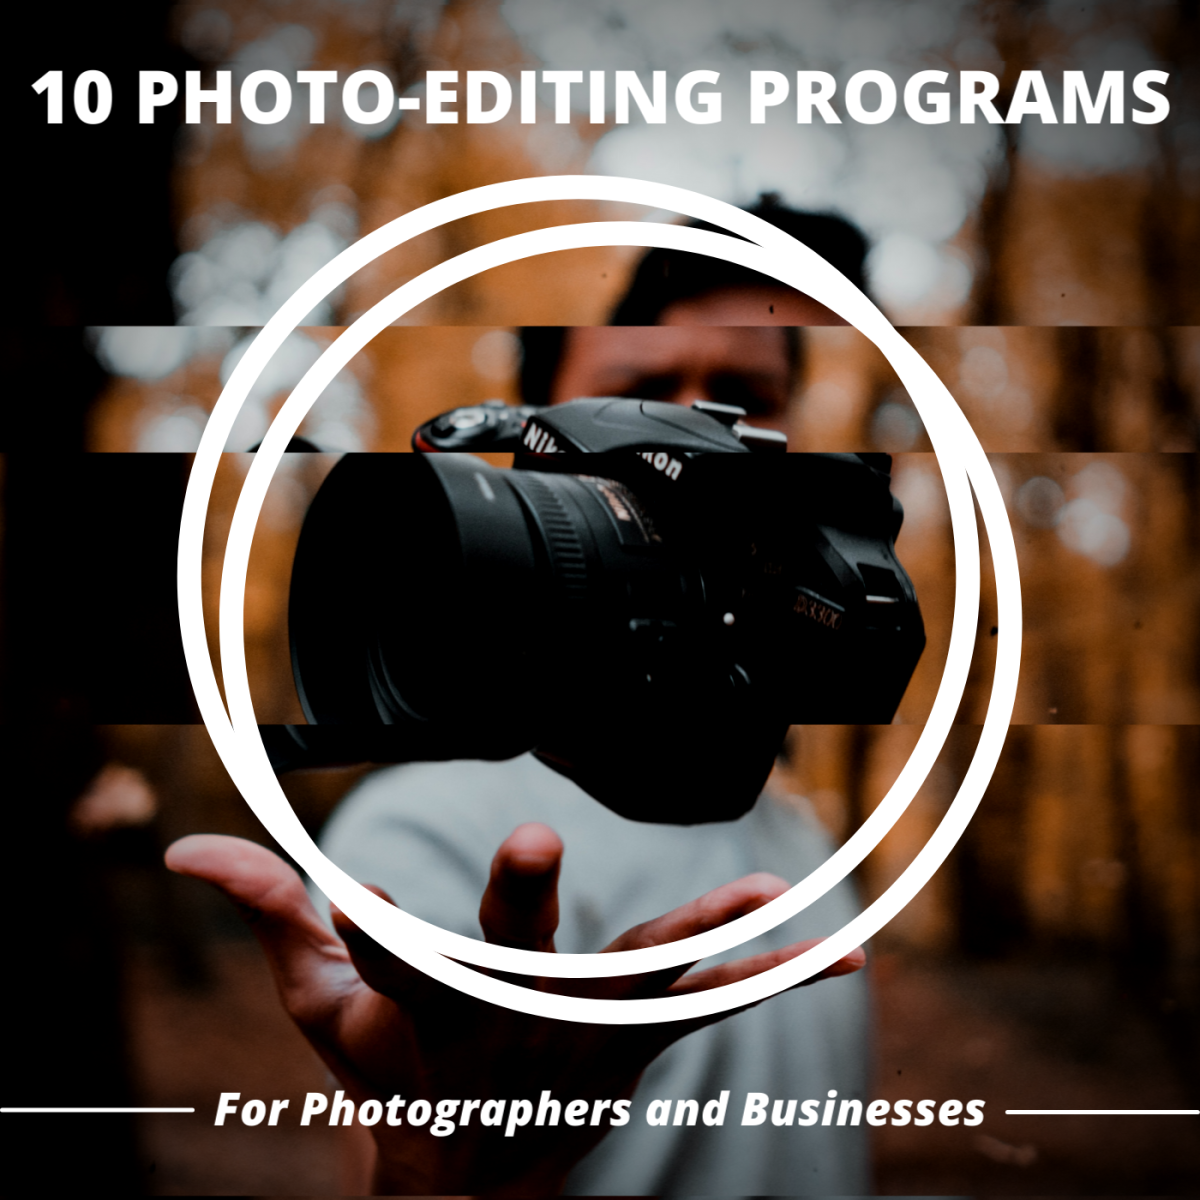 The Best Photo Editing Software by Usability and Price